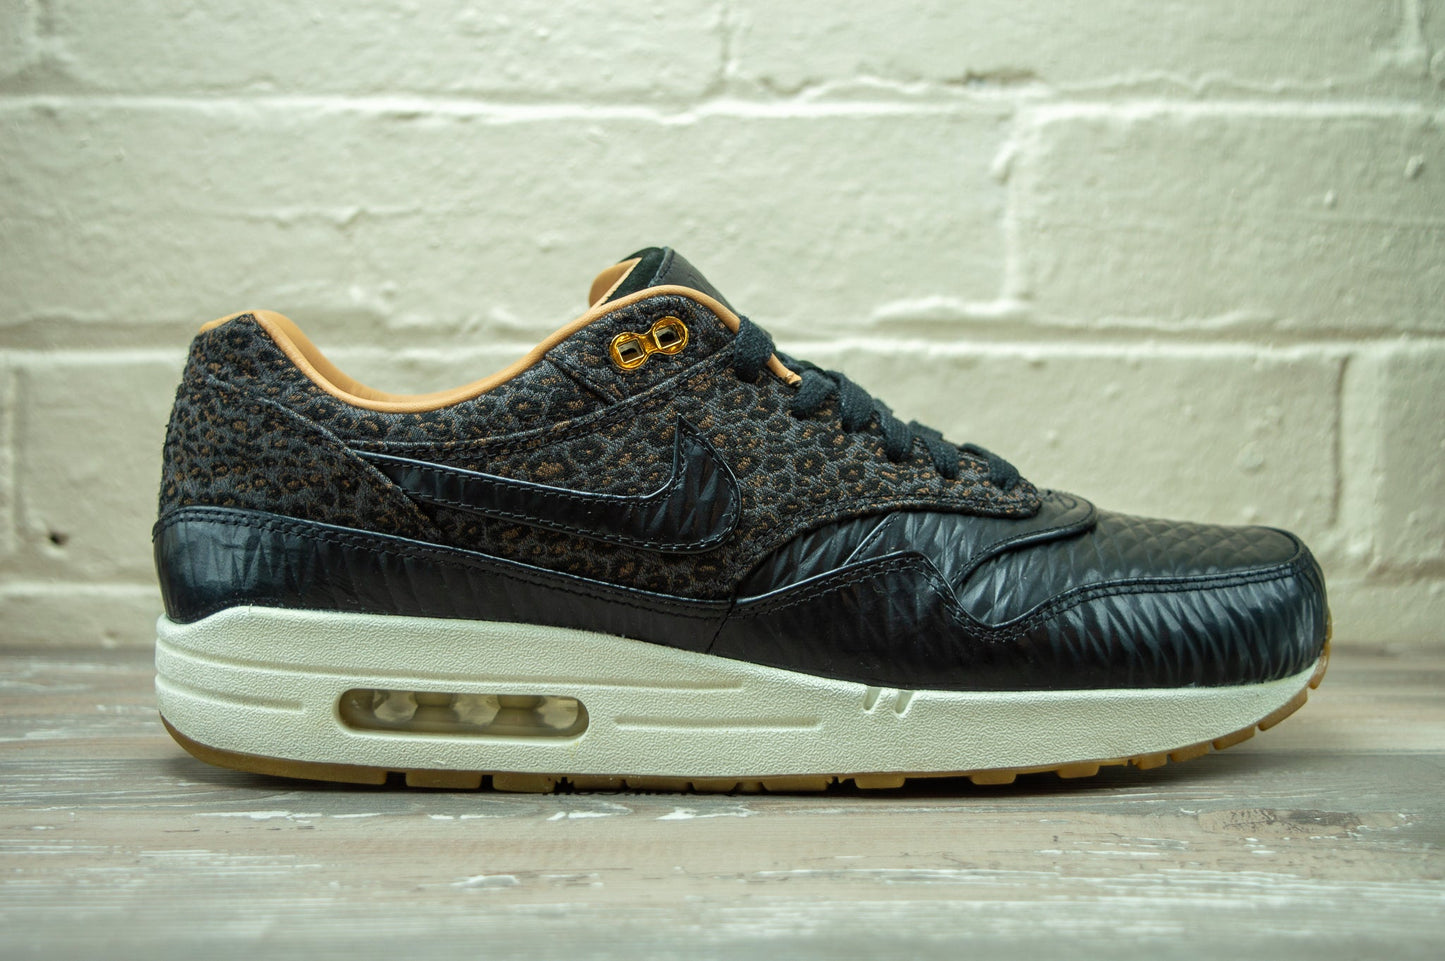 Nike Air Max 1 FB Quilted Leopard 616315 001 -Nike Air Max 1 FB Quilted Leopard 616315 001 -